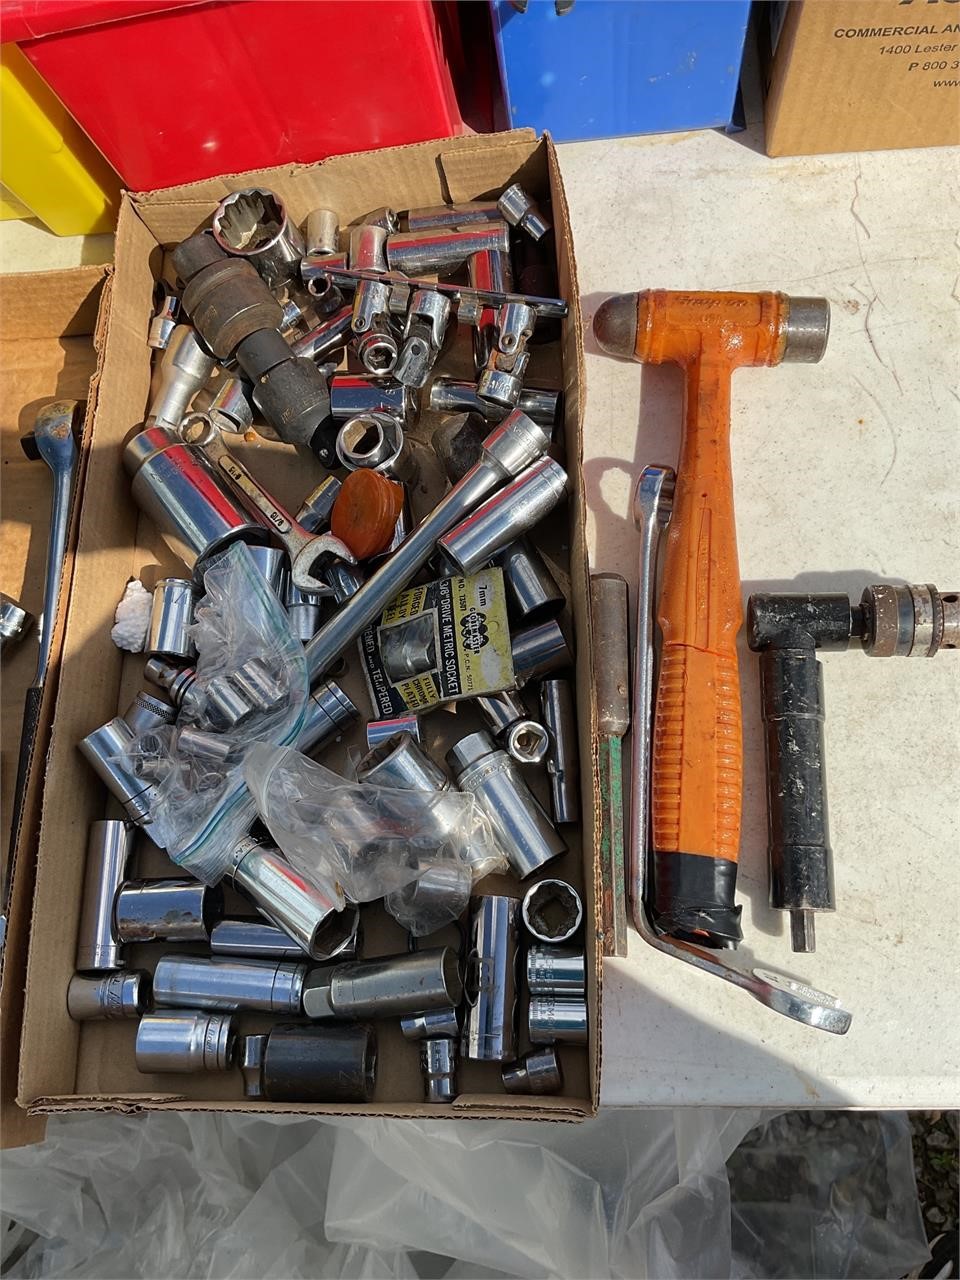 Assorted brand sockets and extra tools